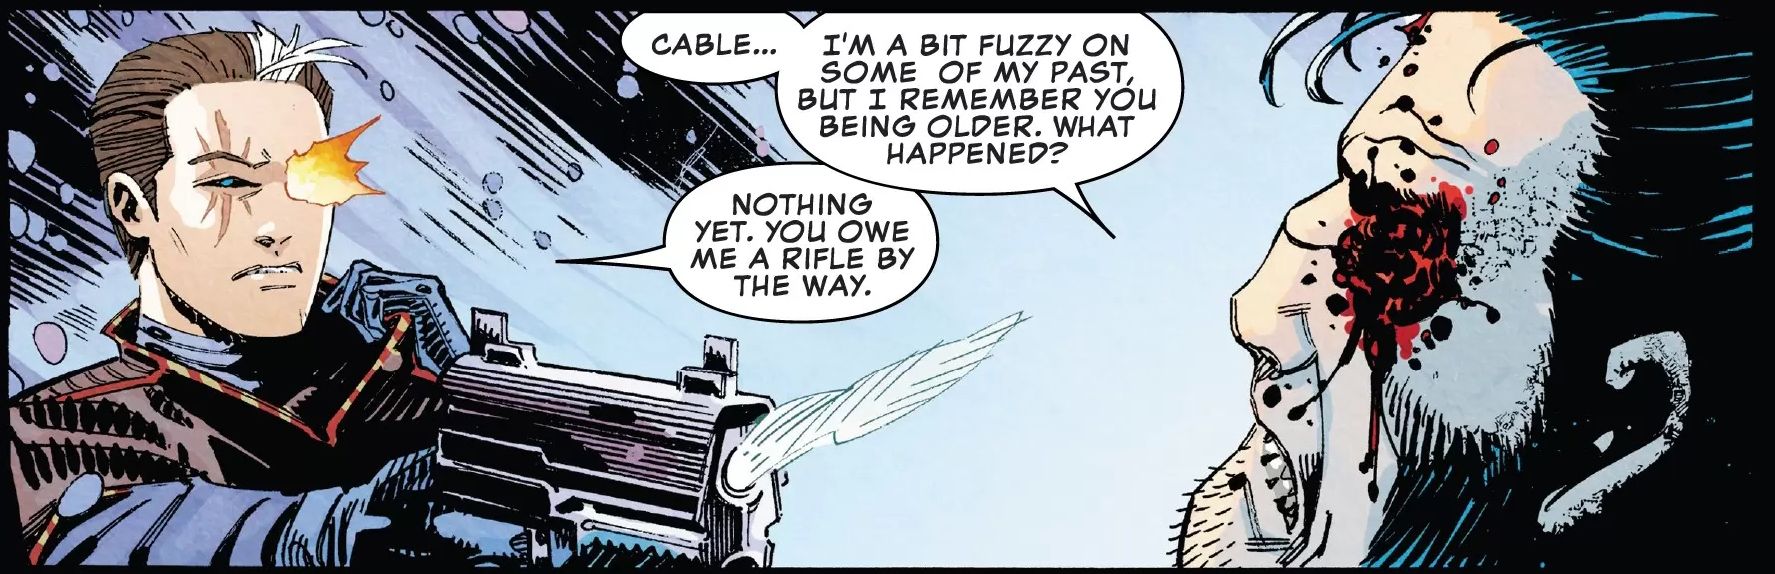 Wolverine Cable Fuzzy memory